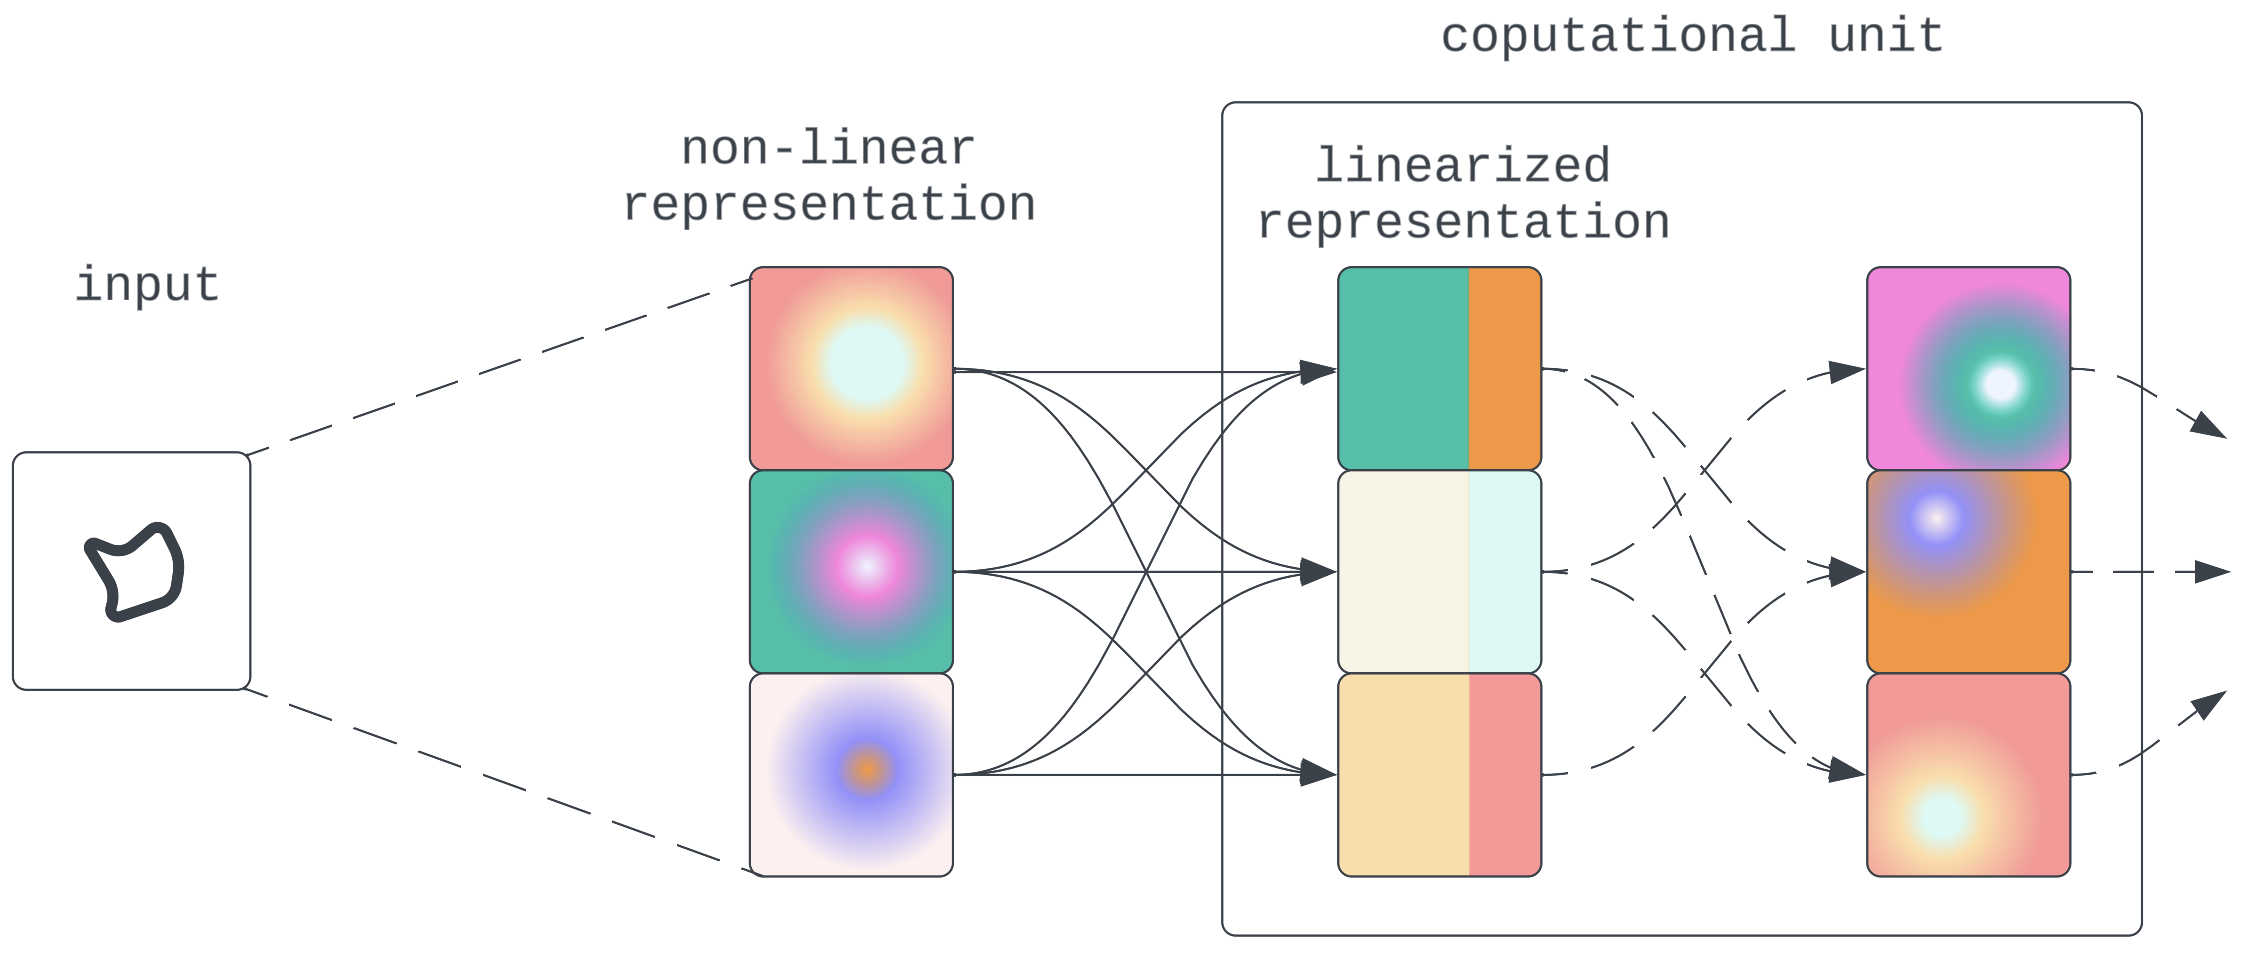 Non-linear compression and propagation intervened by linear computation